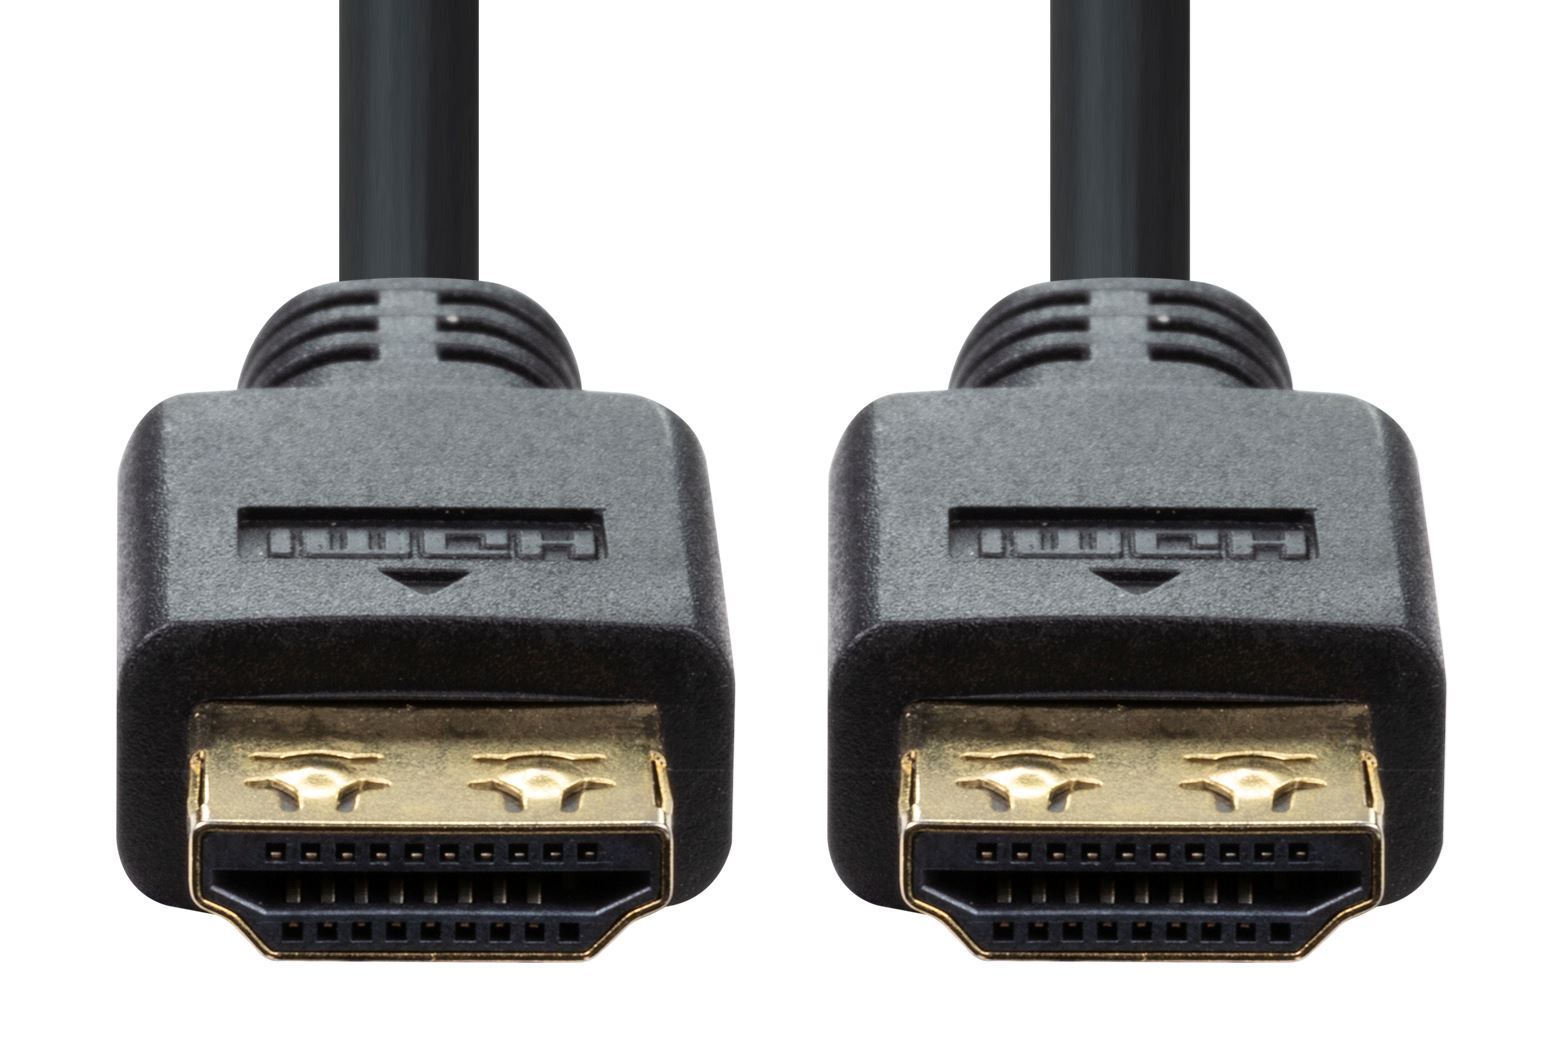 DYNAMIX_2m_HDMI_High_Speed_18Gbps_Flexi_Lock_Cable_with_Ethernet._Max_Res:_4K2K@30/60Hz._32_Audio_channels._10/12bit_colour_depth._Supports_CEC_2.0,_3D,_ARC,_Ethernet_2x_simultaneous_video_streams. 730